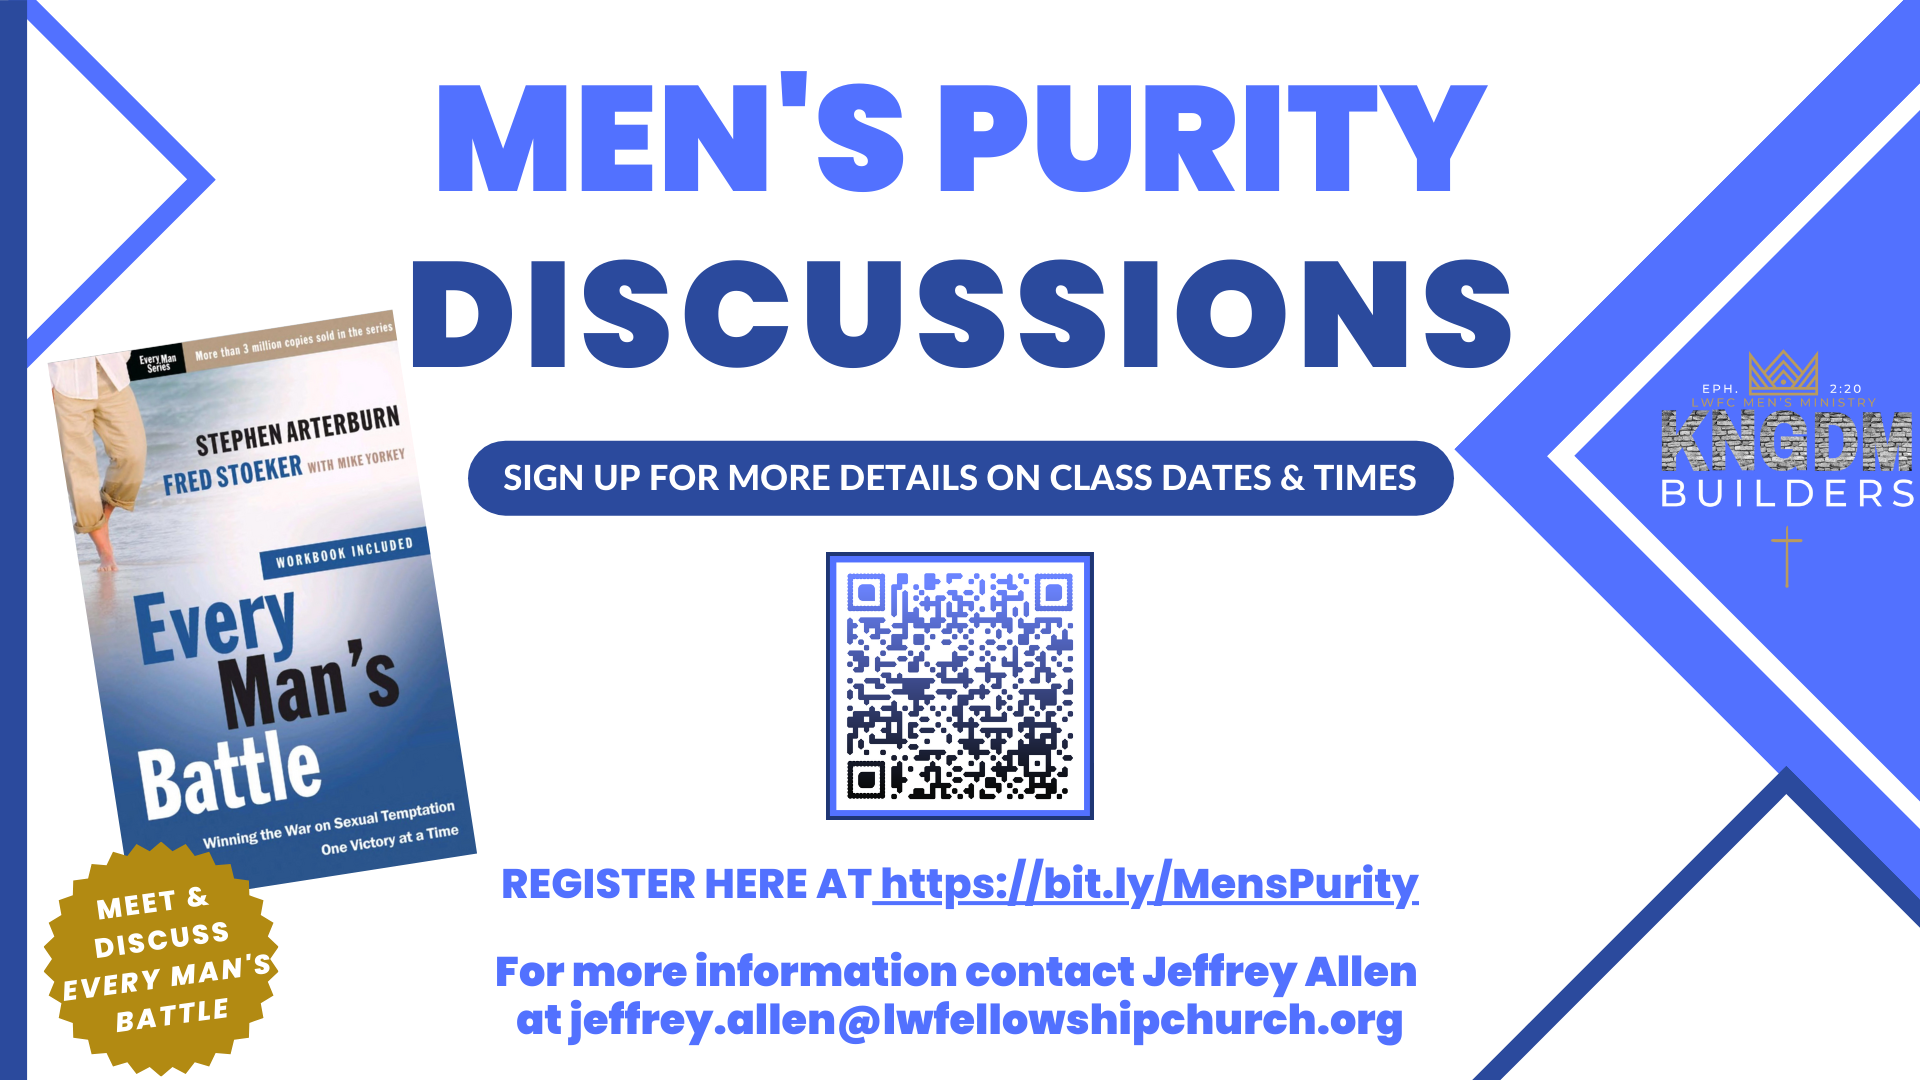 Men’s Purity Discussions head image